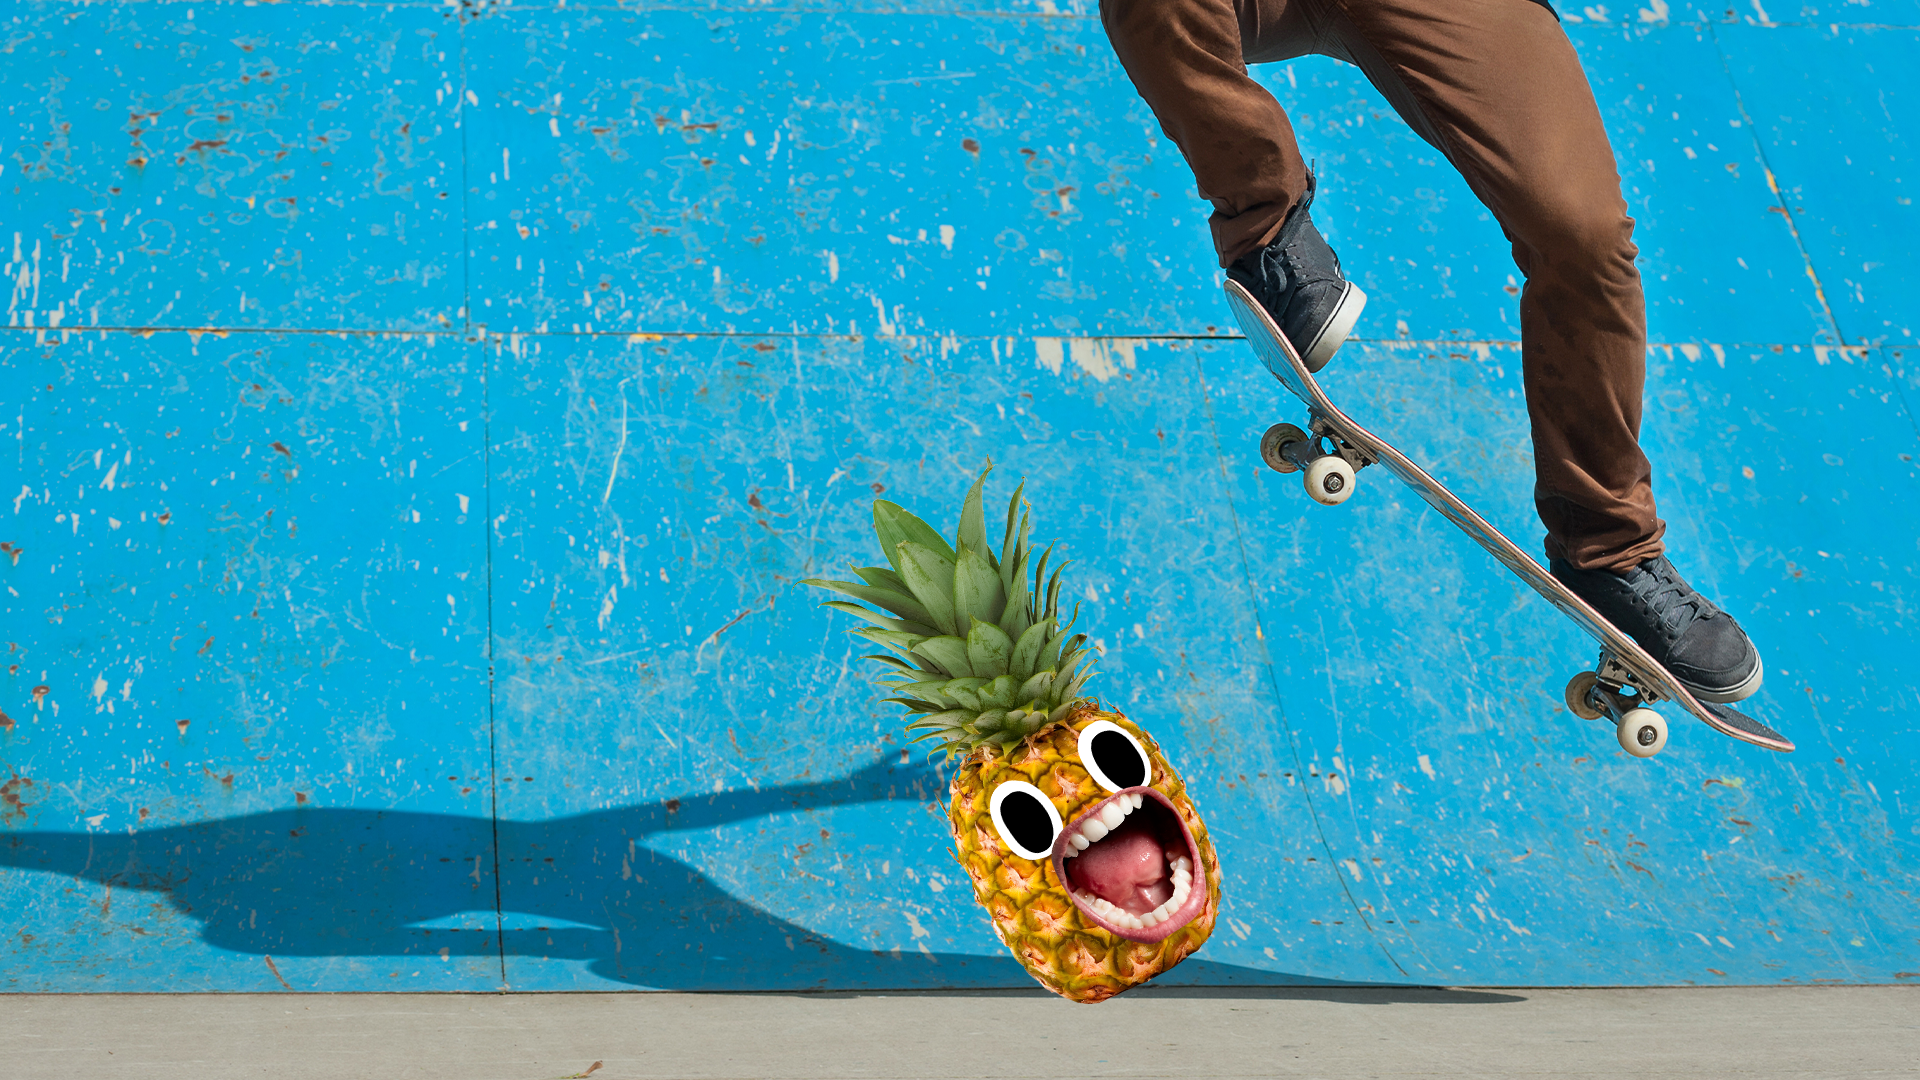 Pinapple screams as skateboarder jumps over it on blue ramp